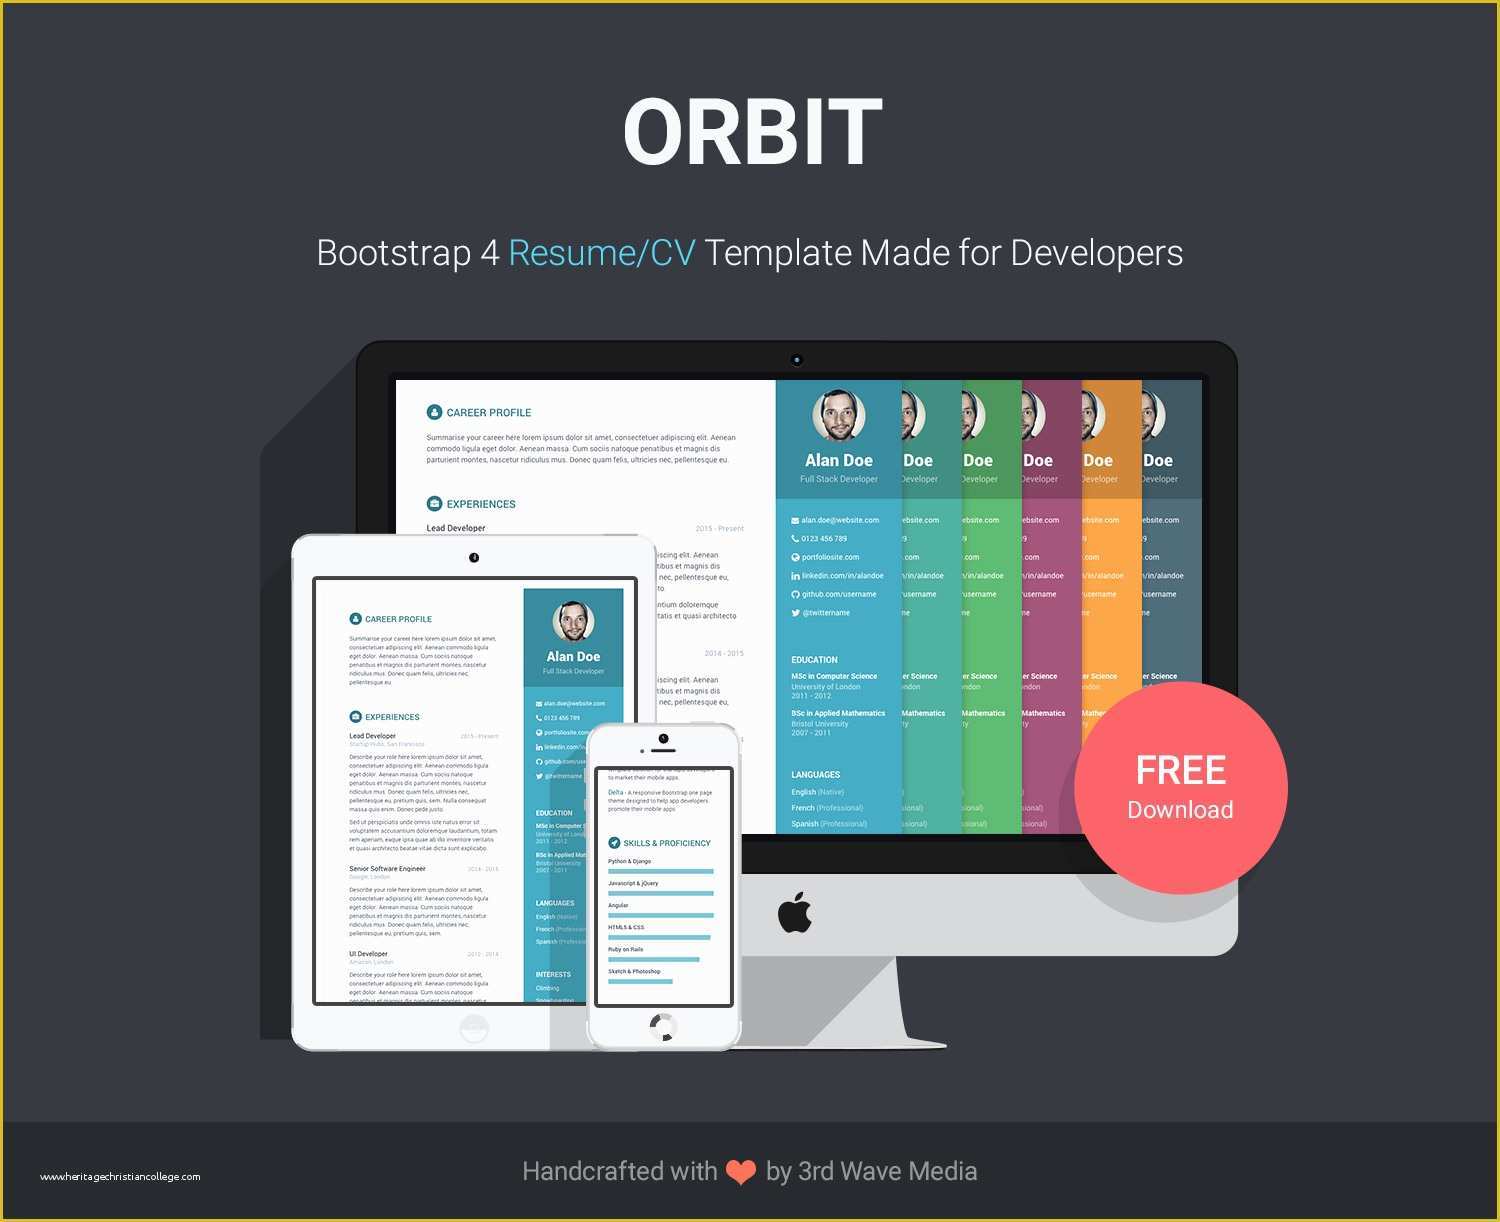 Free Flash Site Templates Download Of Free Bootstrap Resume Cv Template for Developers orbit